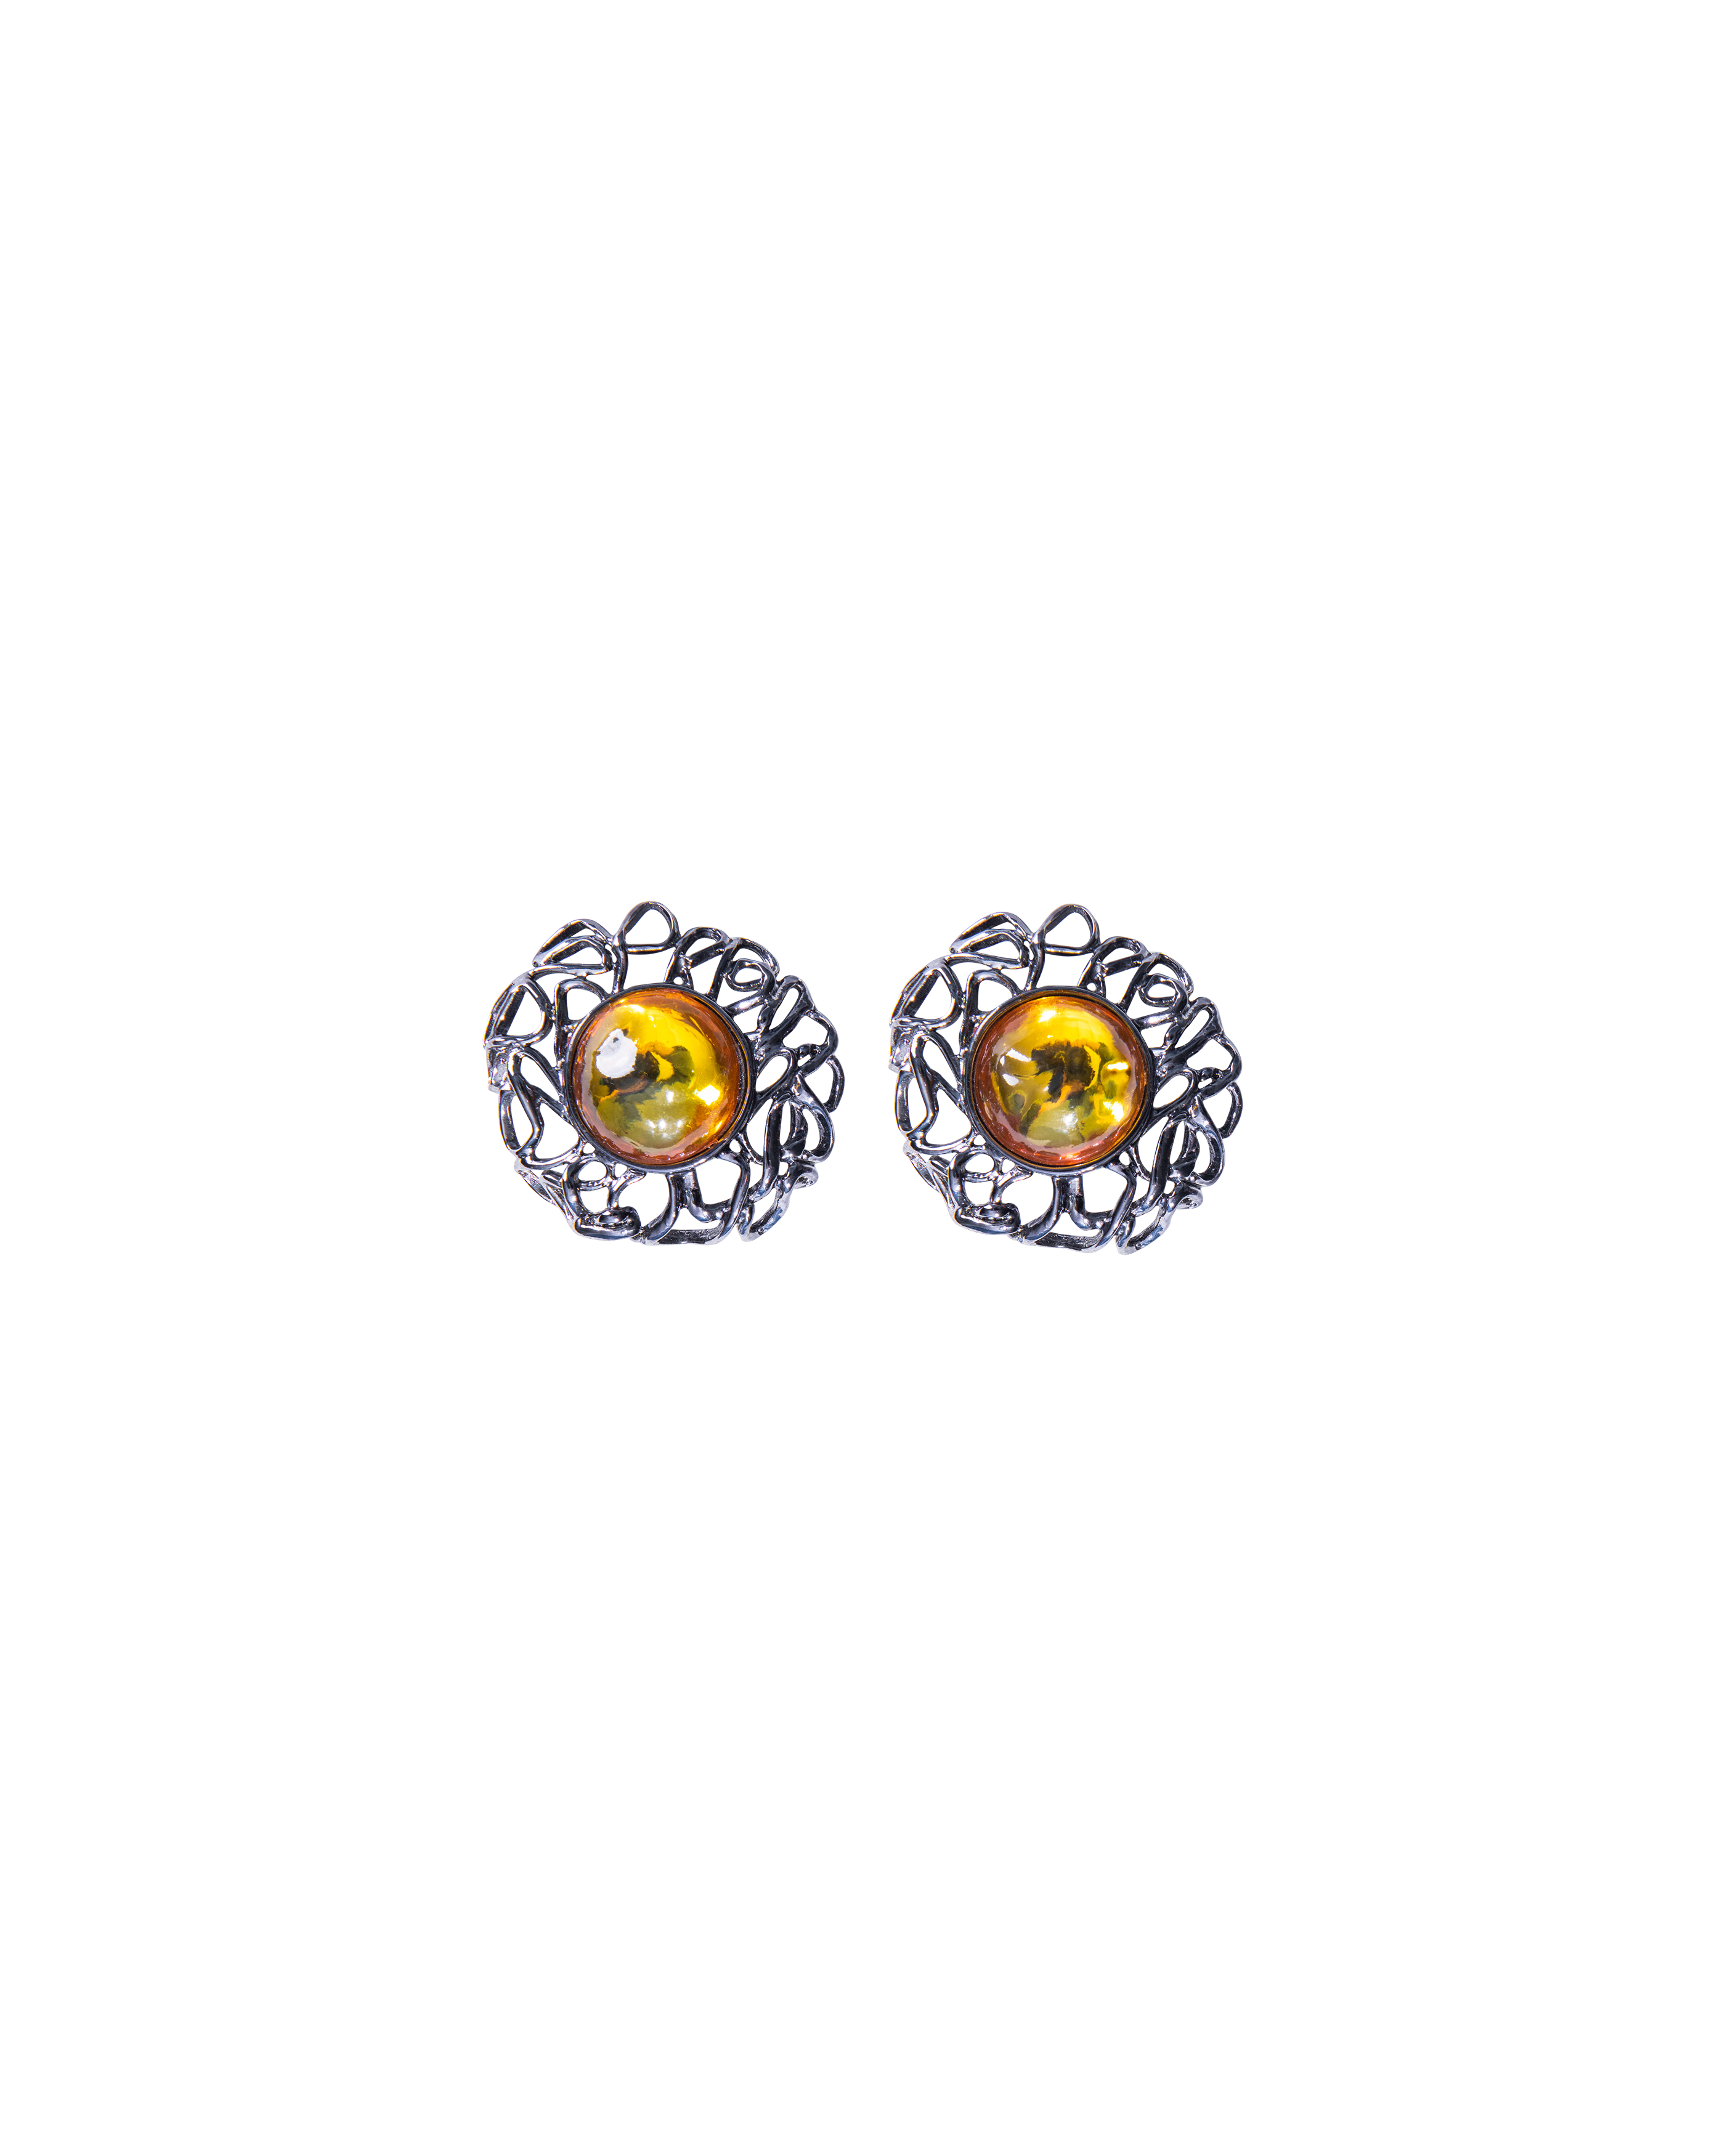 1990's Gunmetal Curved Clip-On Earrings with Yellow-Orange Gemstone Center